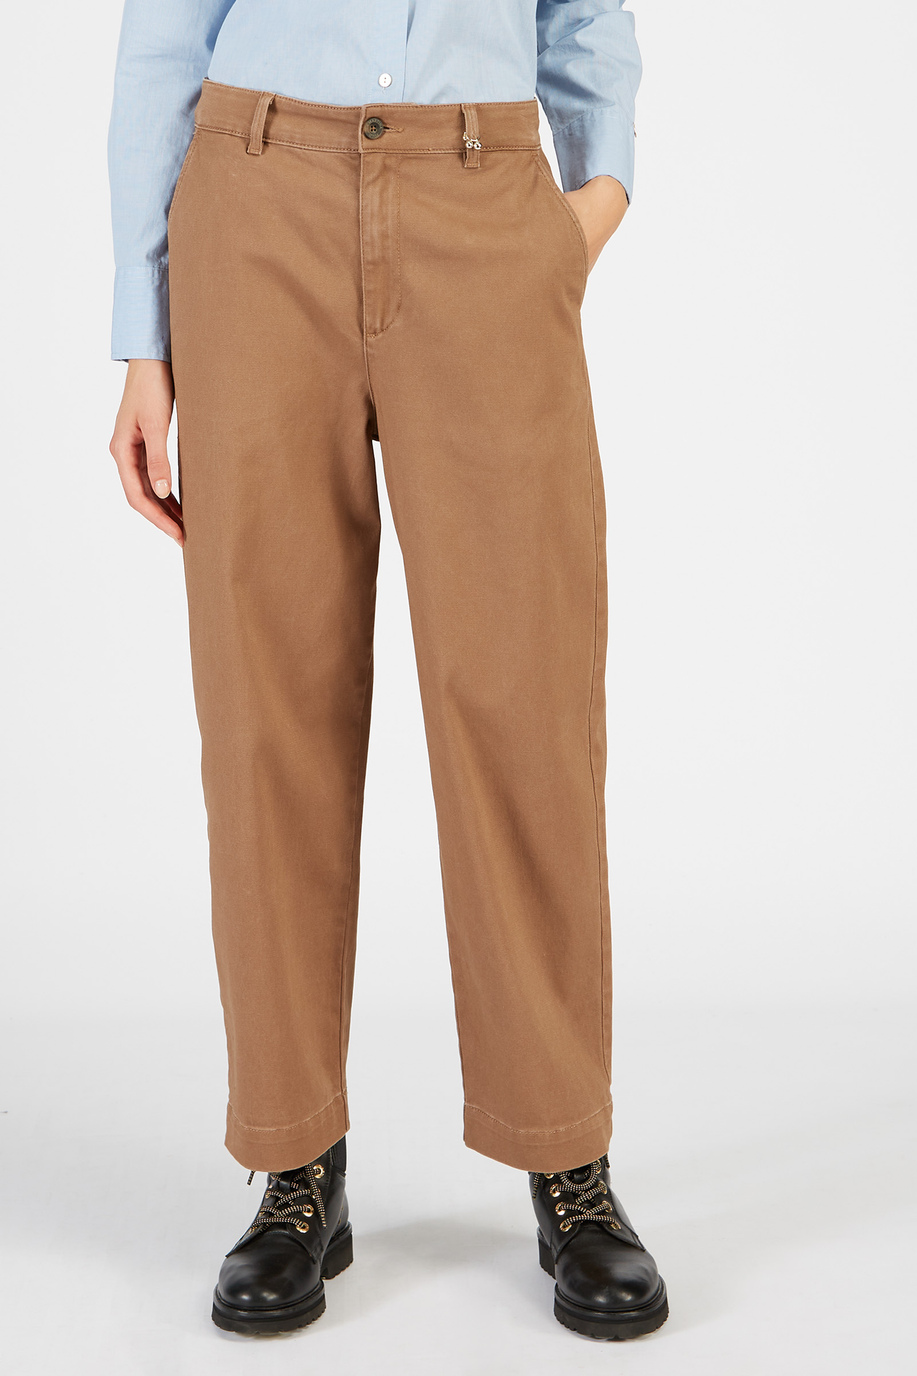 Women’s high-waisted trousers with narrow bottom - Trousers | La Martina - Official Online Shop